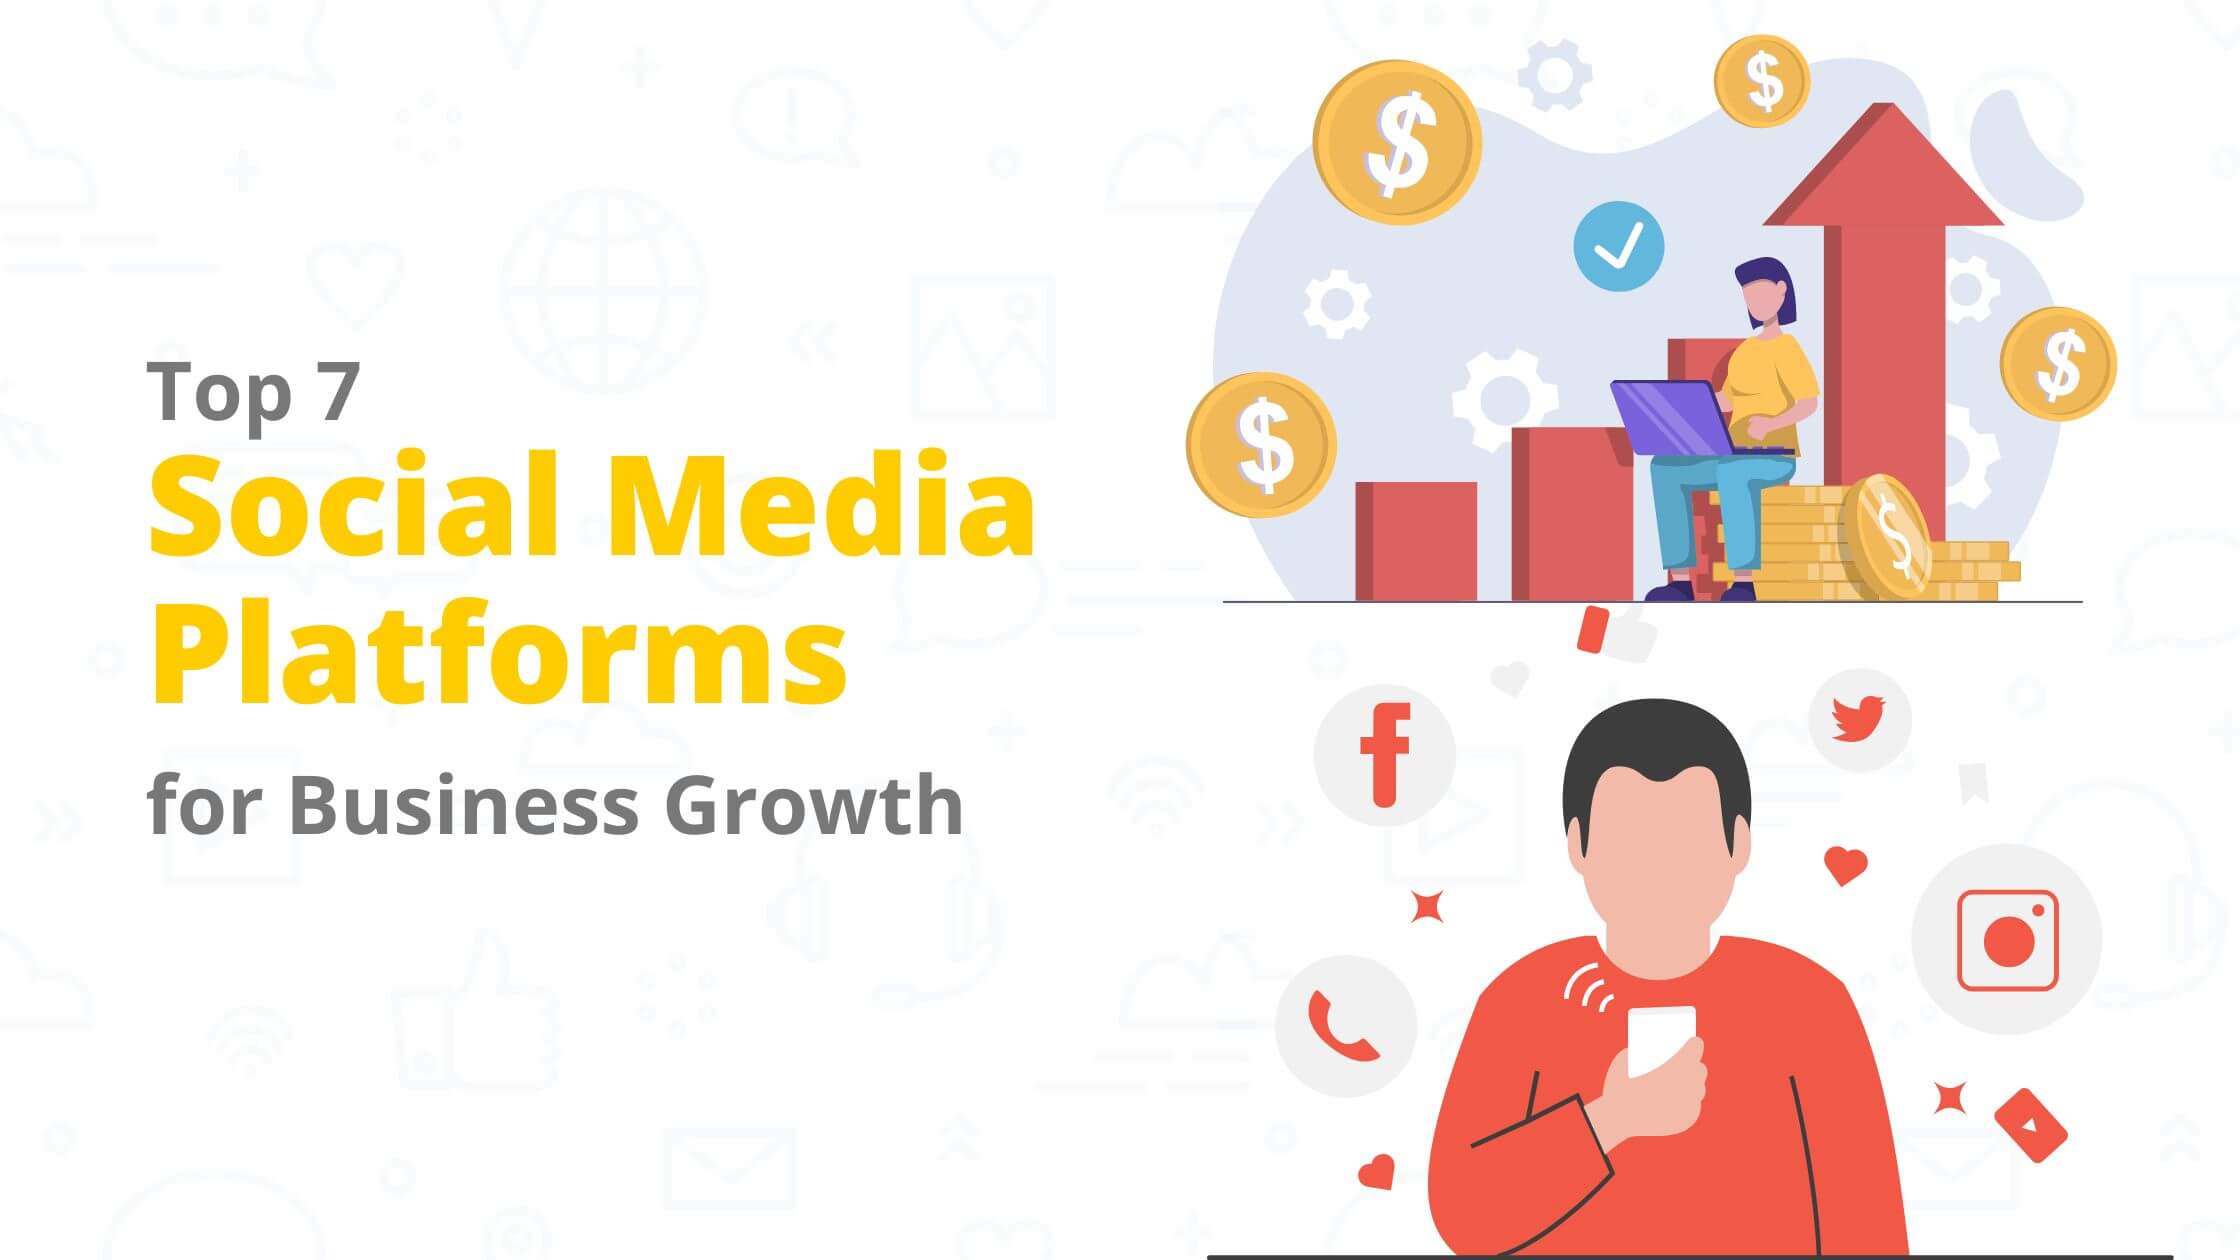 Top 7 Social Media Platforms for Business Growth